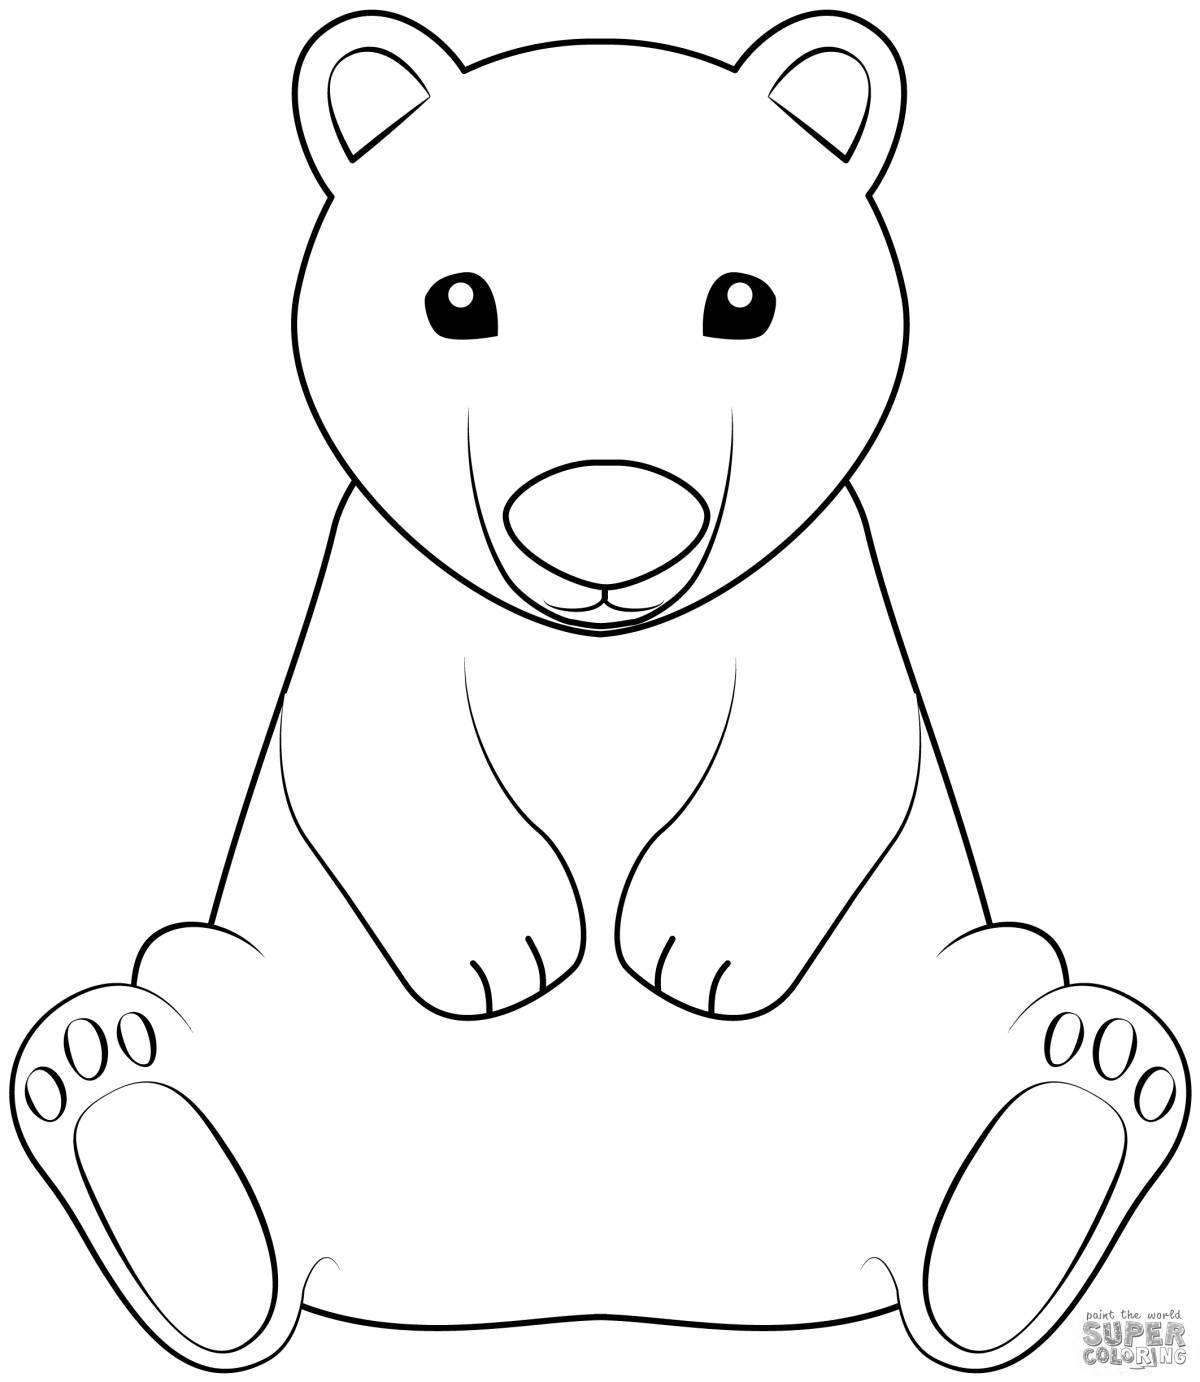 Adorable polar bear coloring book for kids 2-3 years old